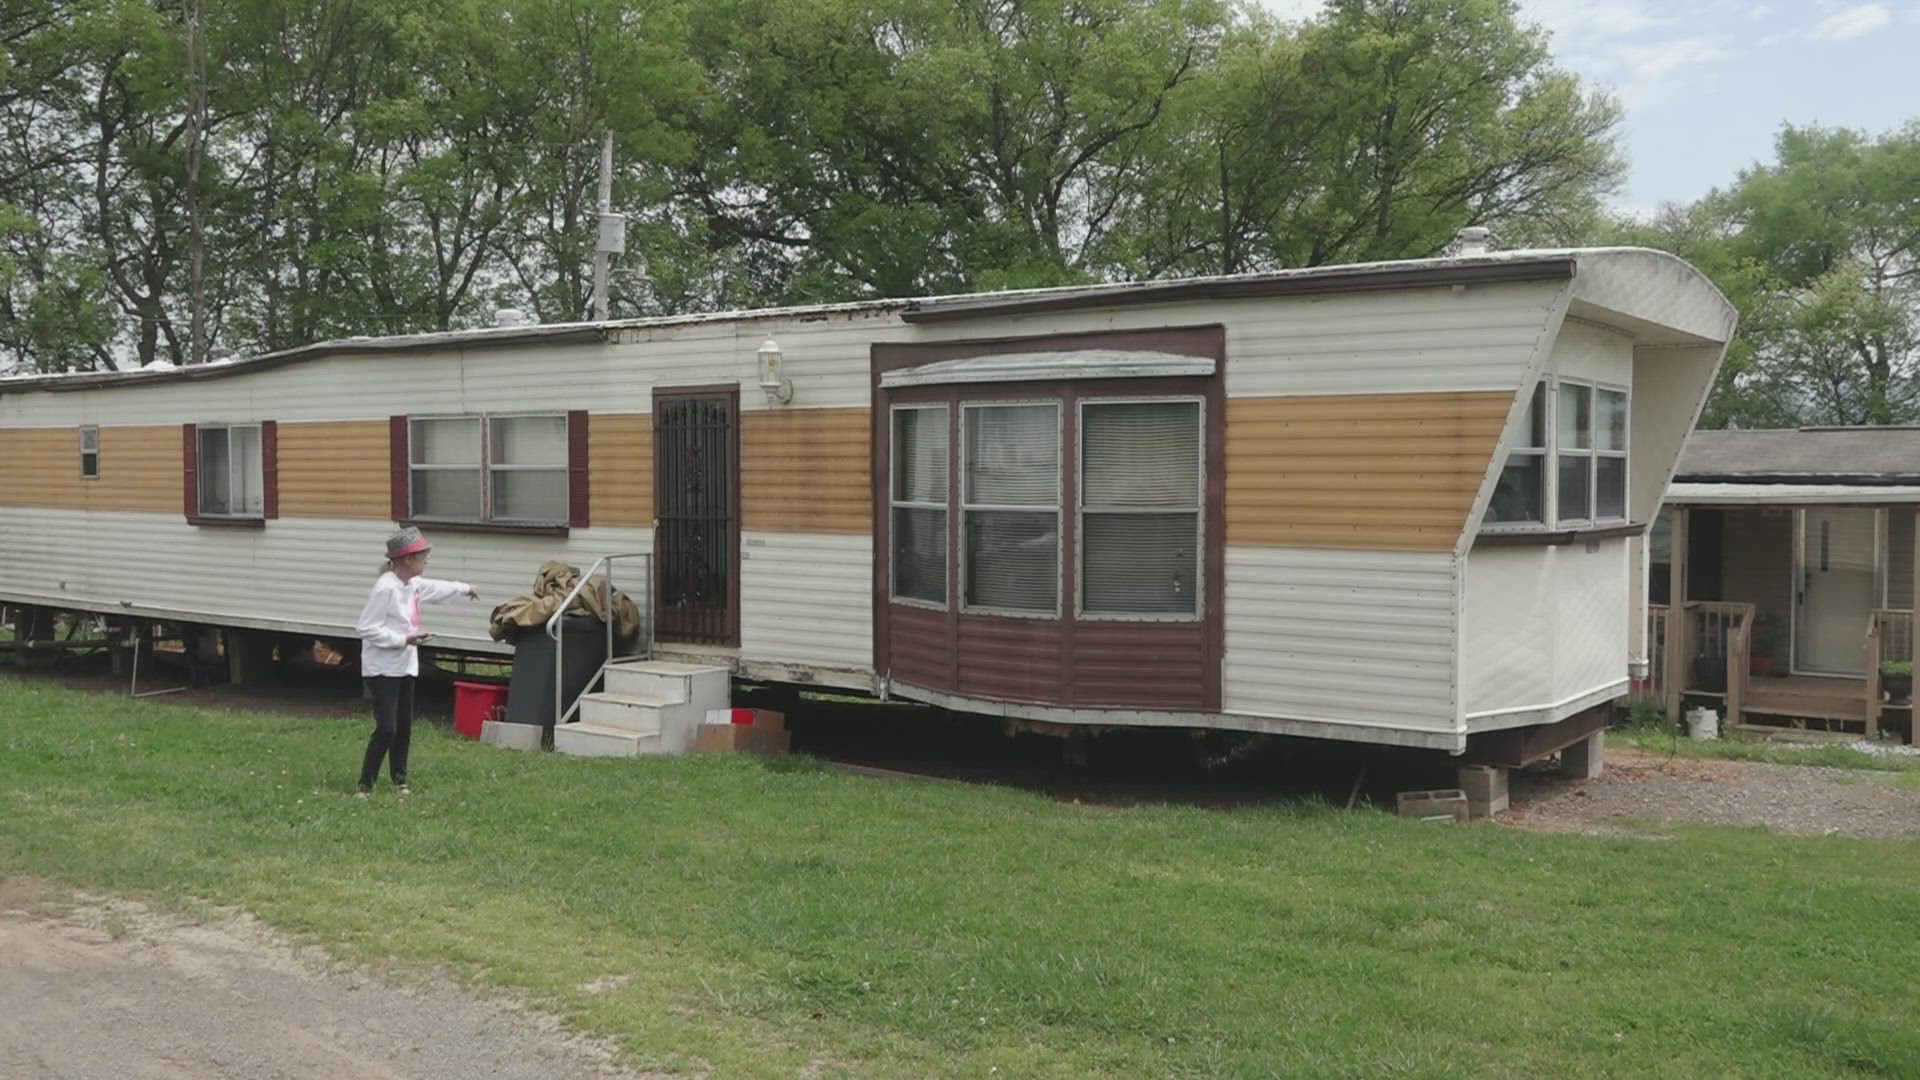 Legal Aid of East Tennessee has seen an increase in mobile home lot evictions since the pandemic.